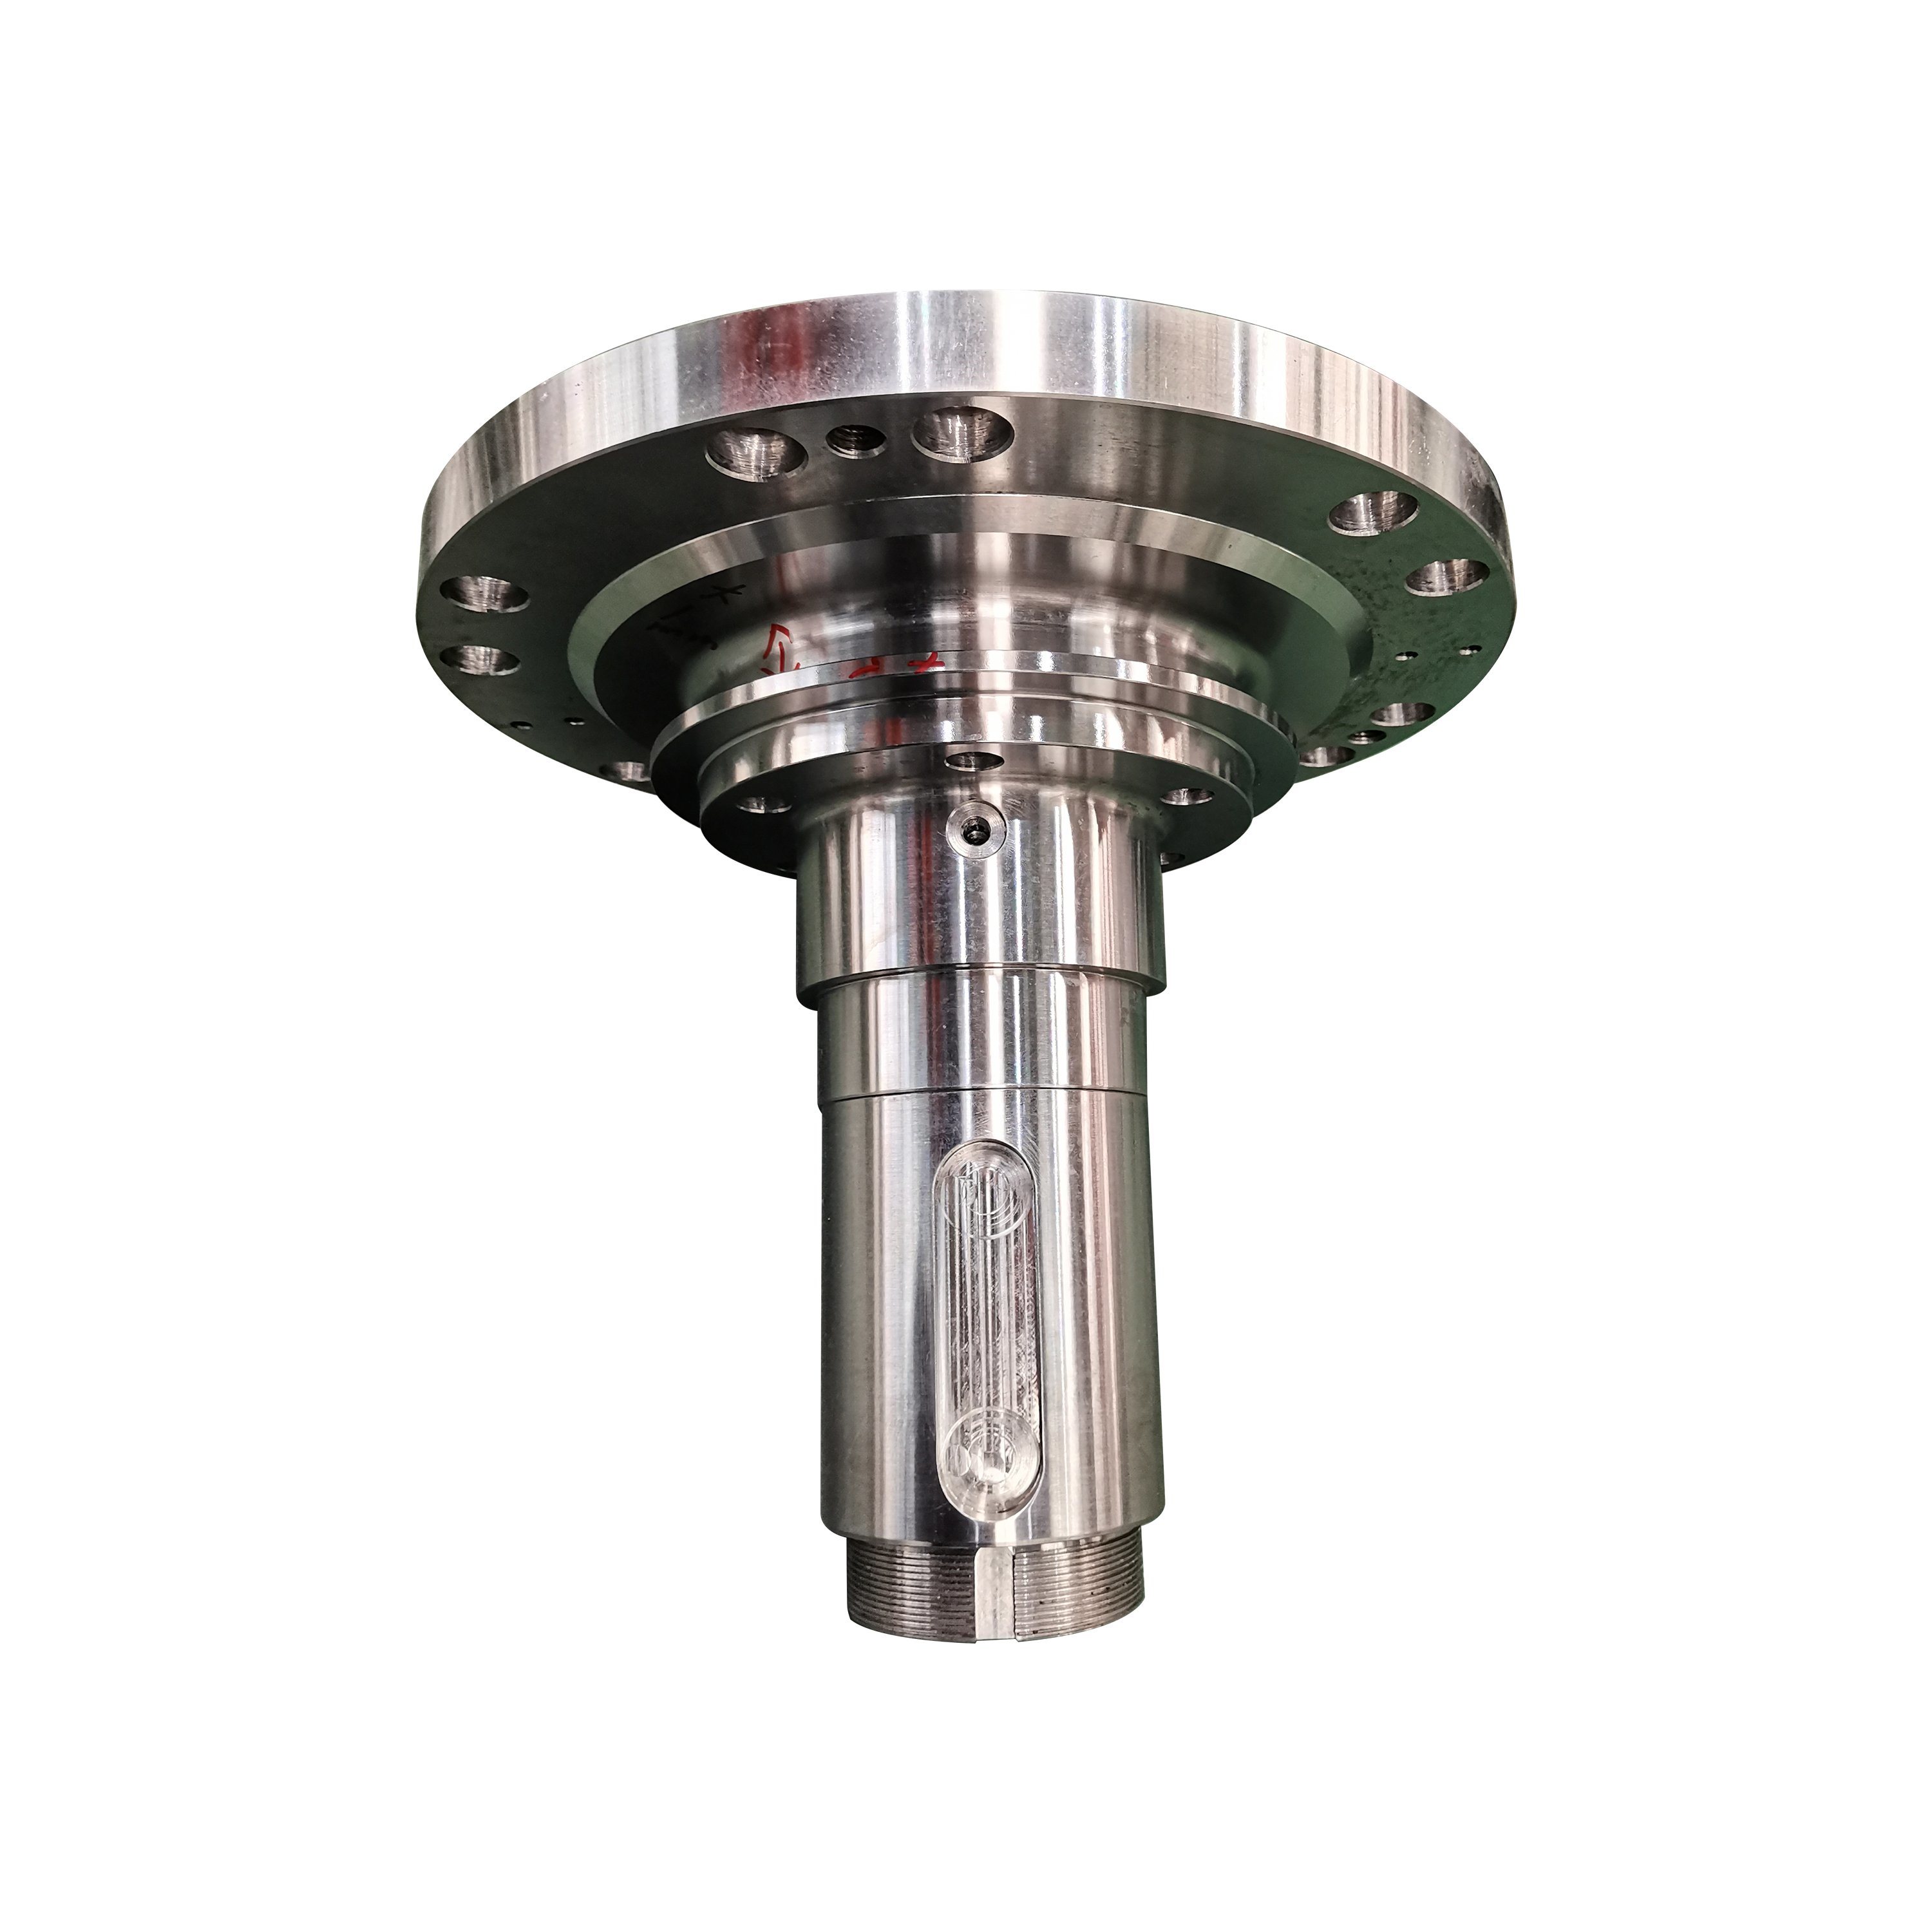 Finish Machined End Hub for Decanter Centrifuge